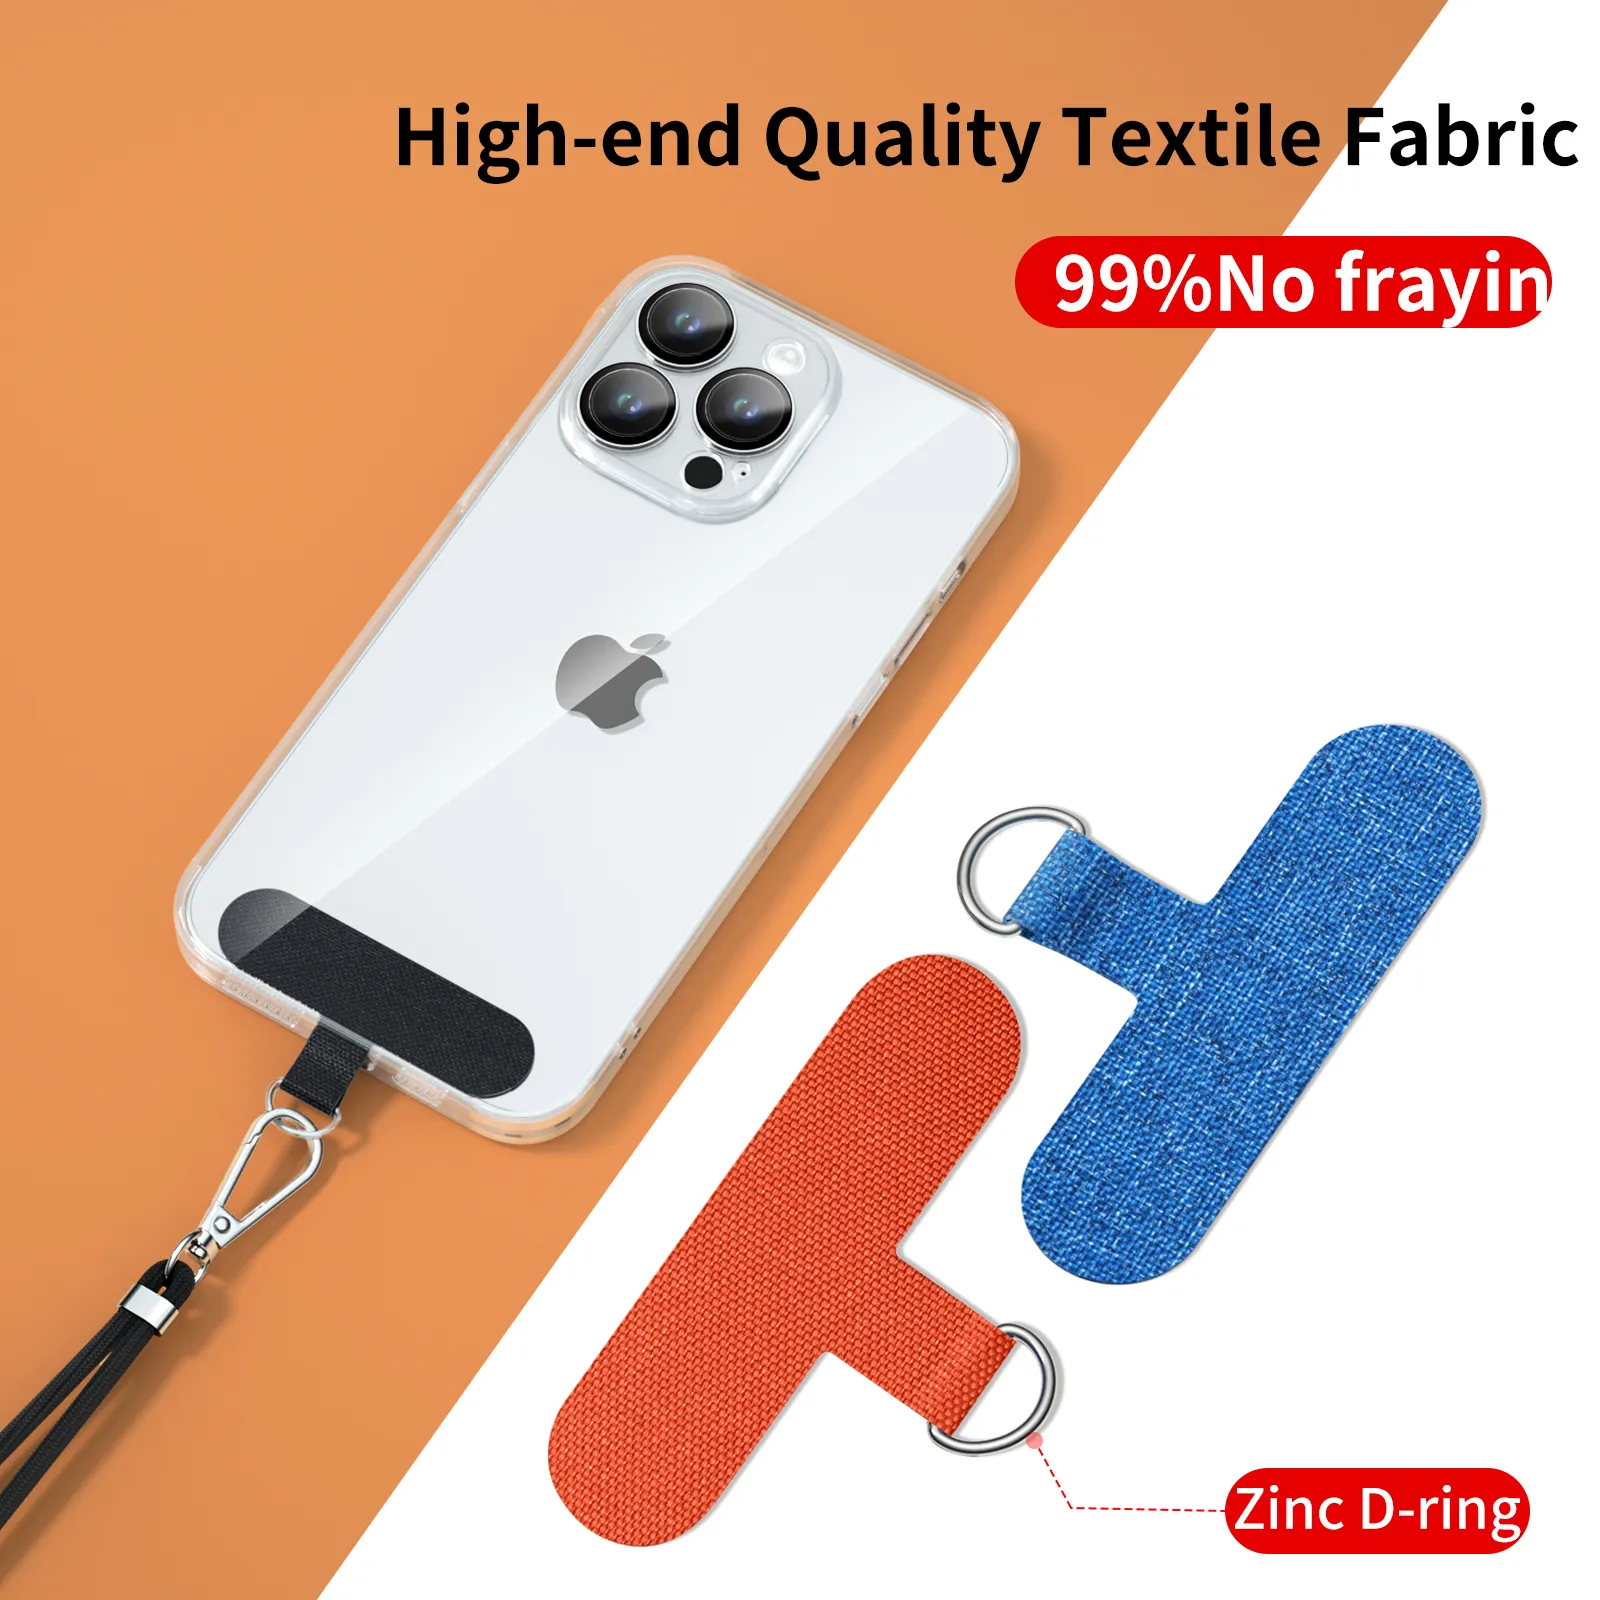 High-End Universal Fabric Cell Phone Lanyard with Durable Ropes and D-Ring Patch Shape Fabric Clip for Mobile Phone Straps